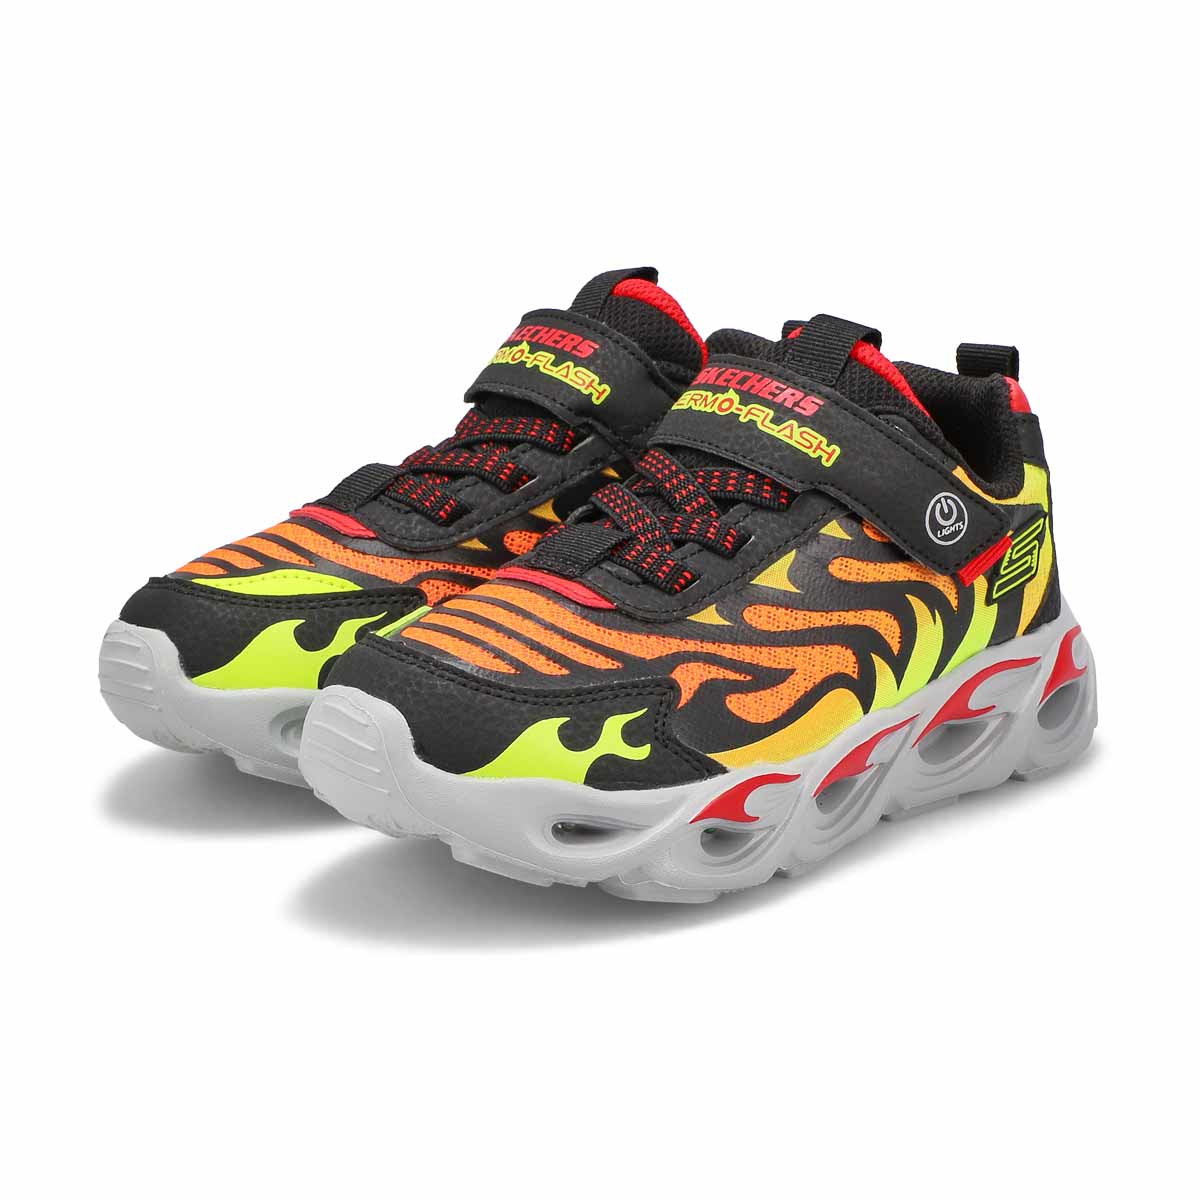 Boys' Thermo-Flash Light Up Sneakers - Black/Red